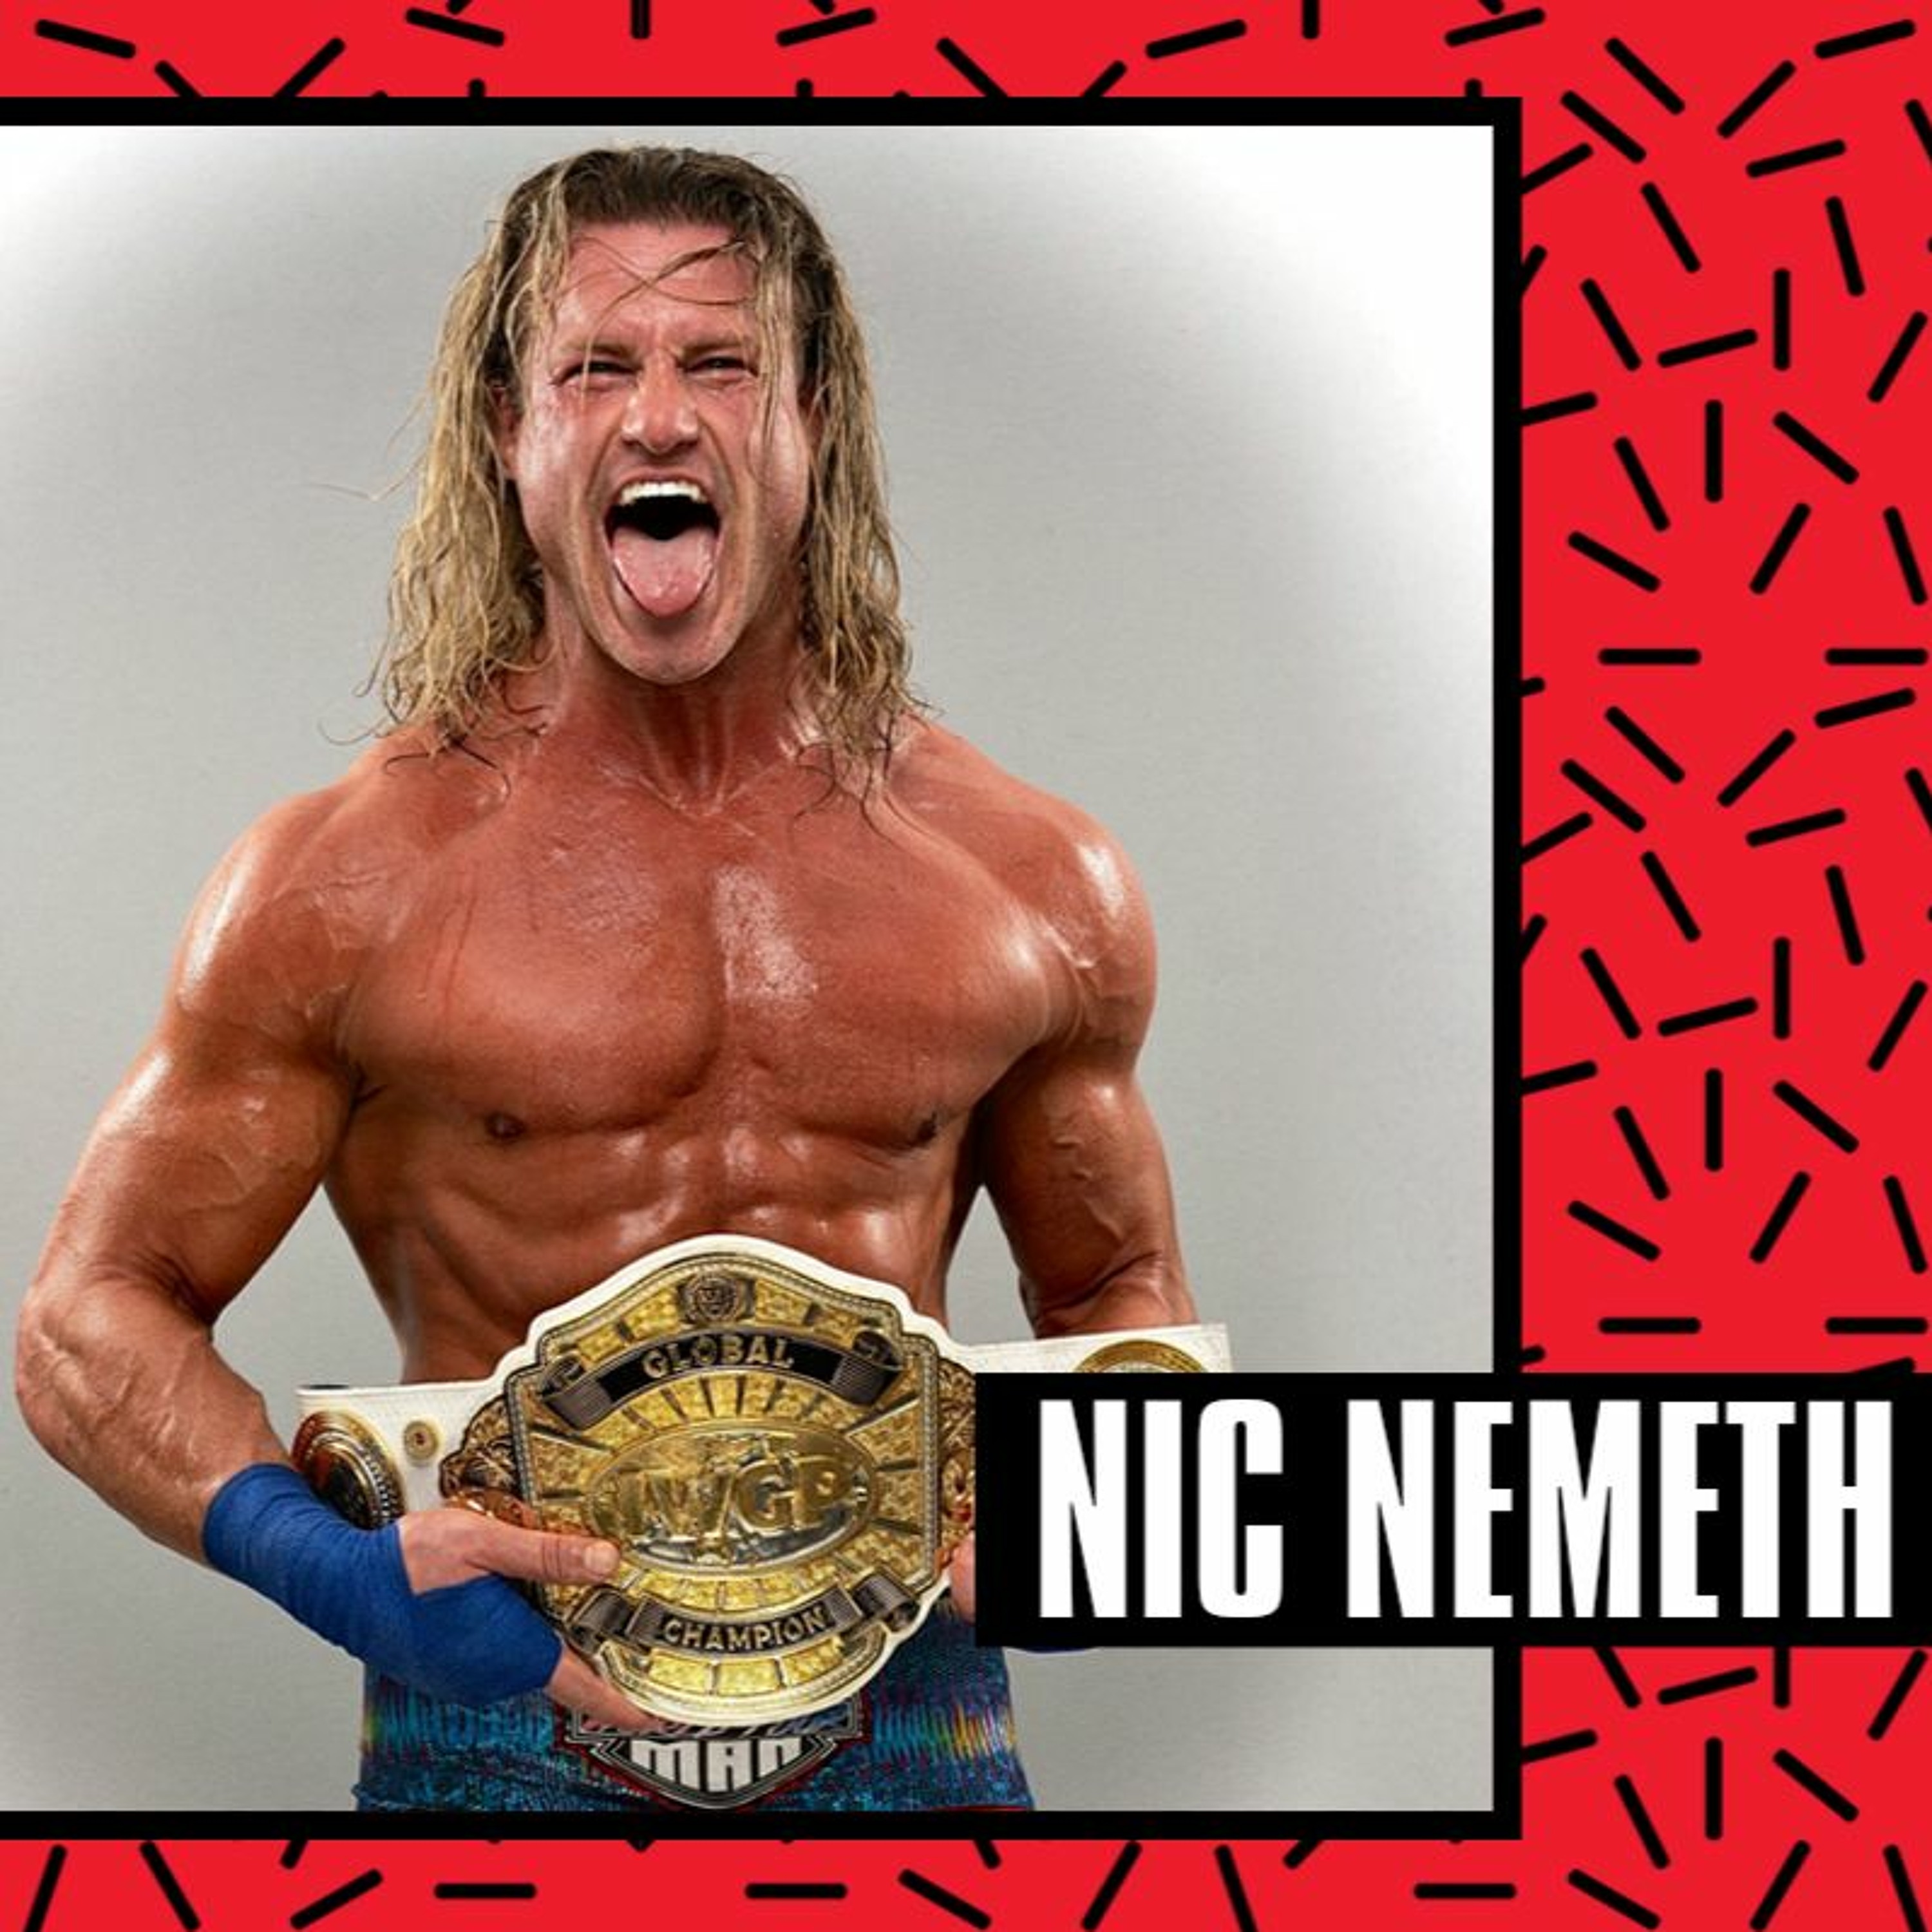 Nic Nemeth wants to steal the show with TNA, hook people with great stories